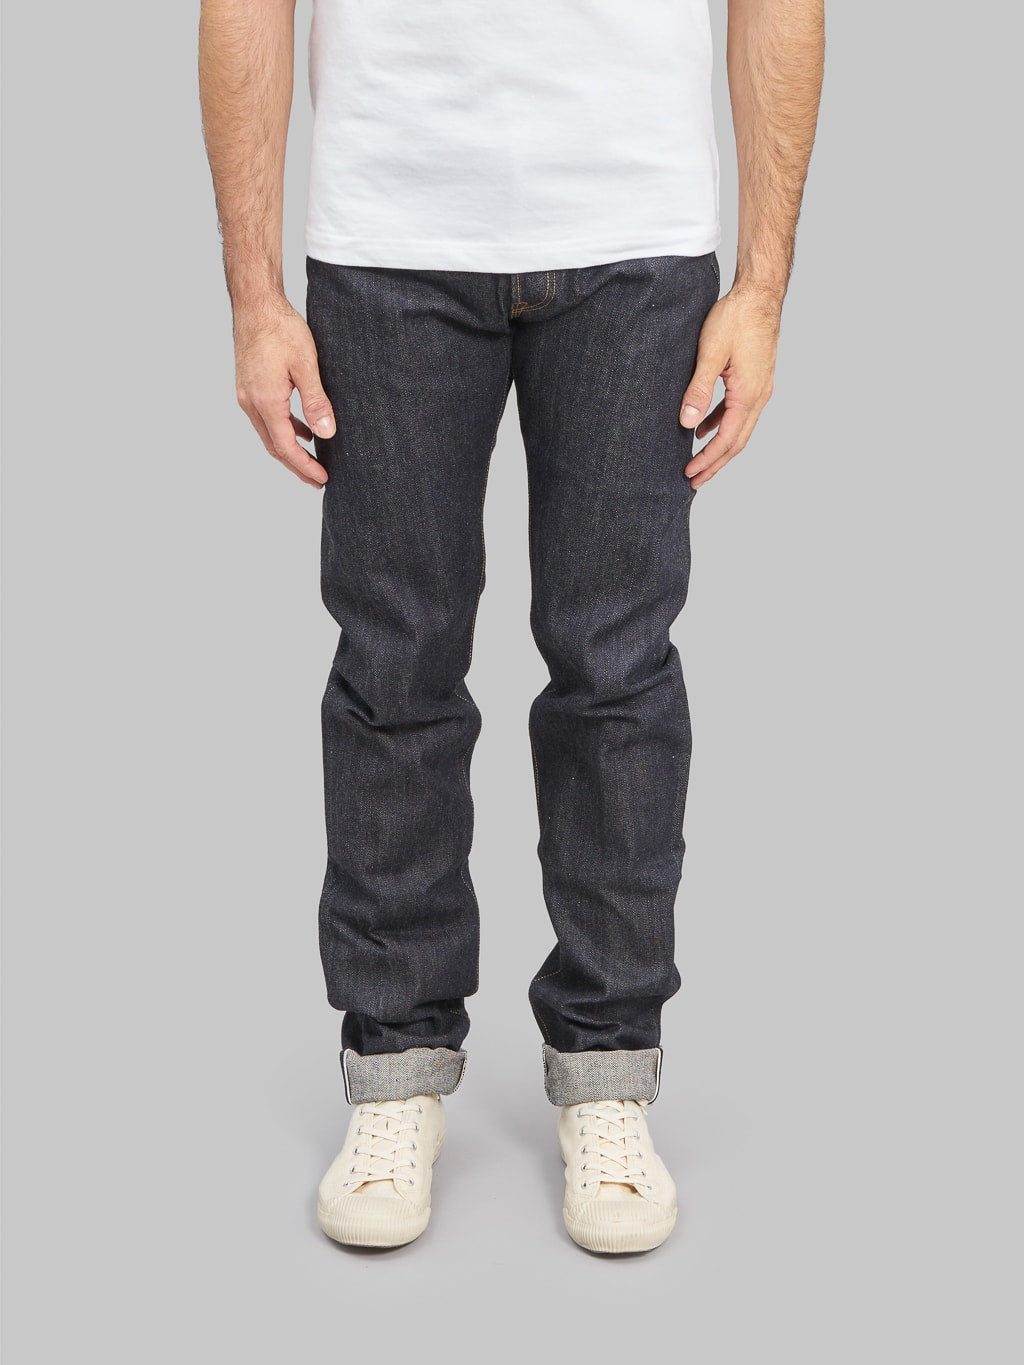 The Flat Head D306 Tight Tapered selvedge Jeans front